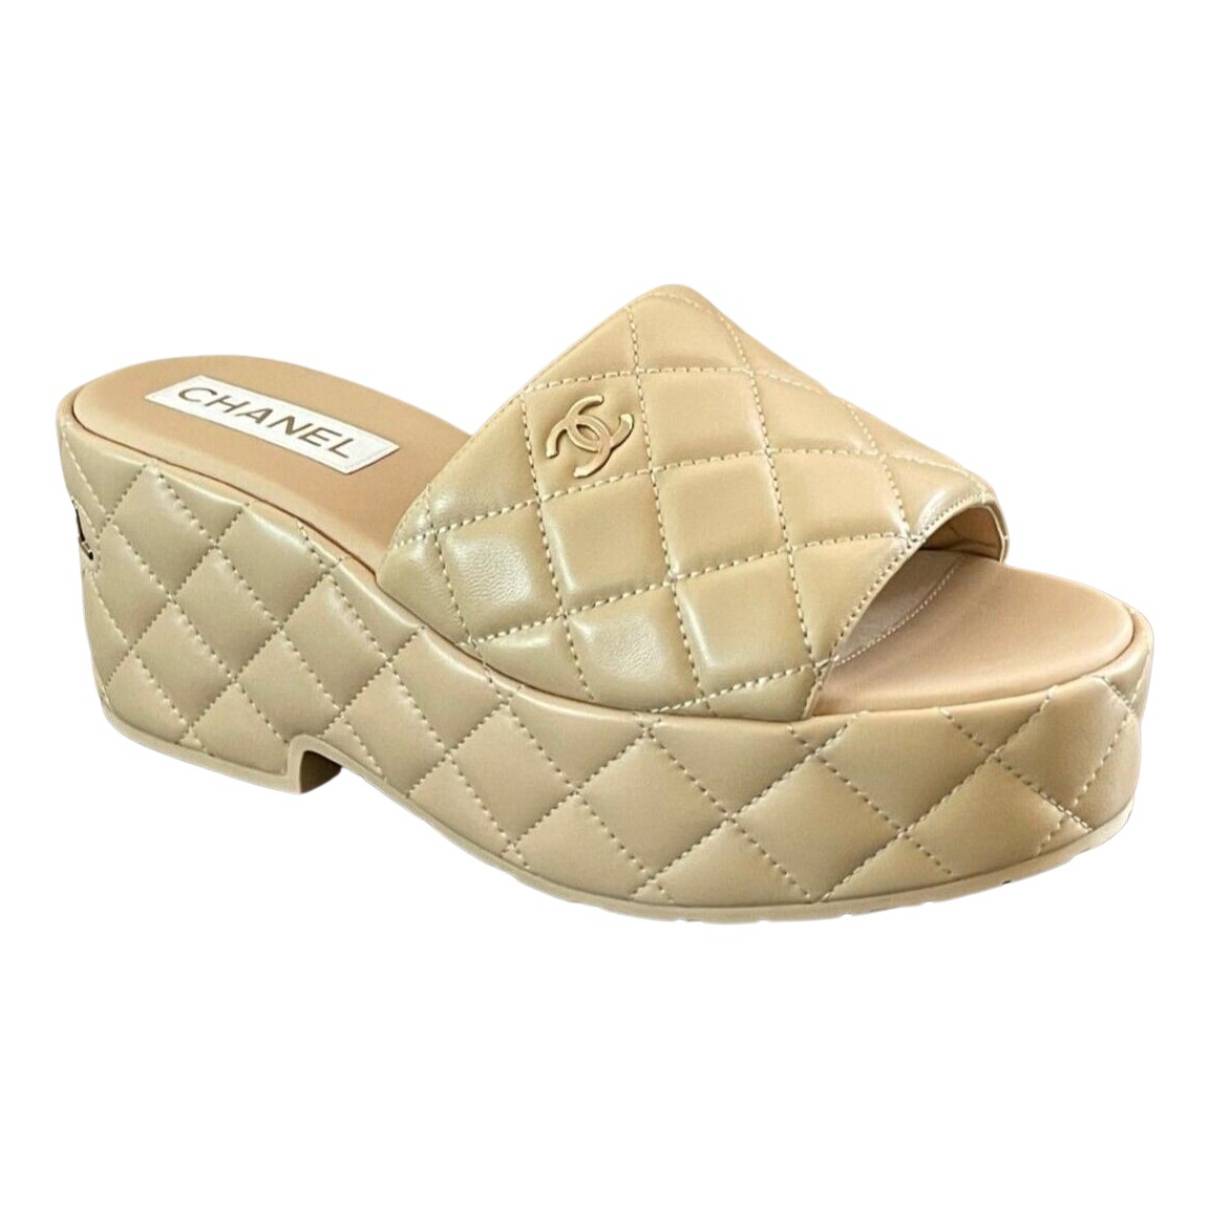 CHANEL Beige Quilted Leather Mule Wedge Platform Sandal Gold CC